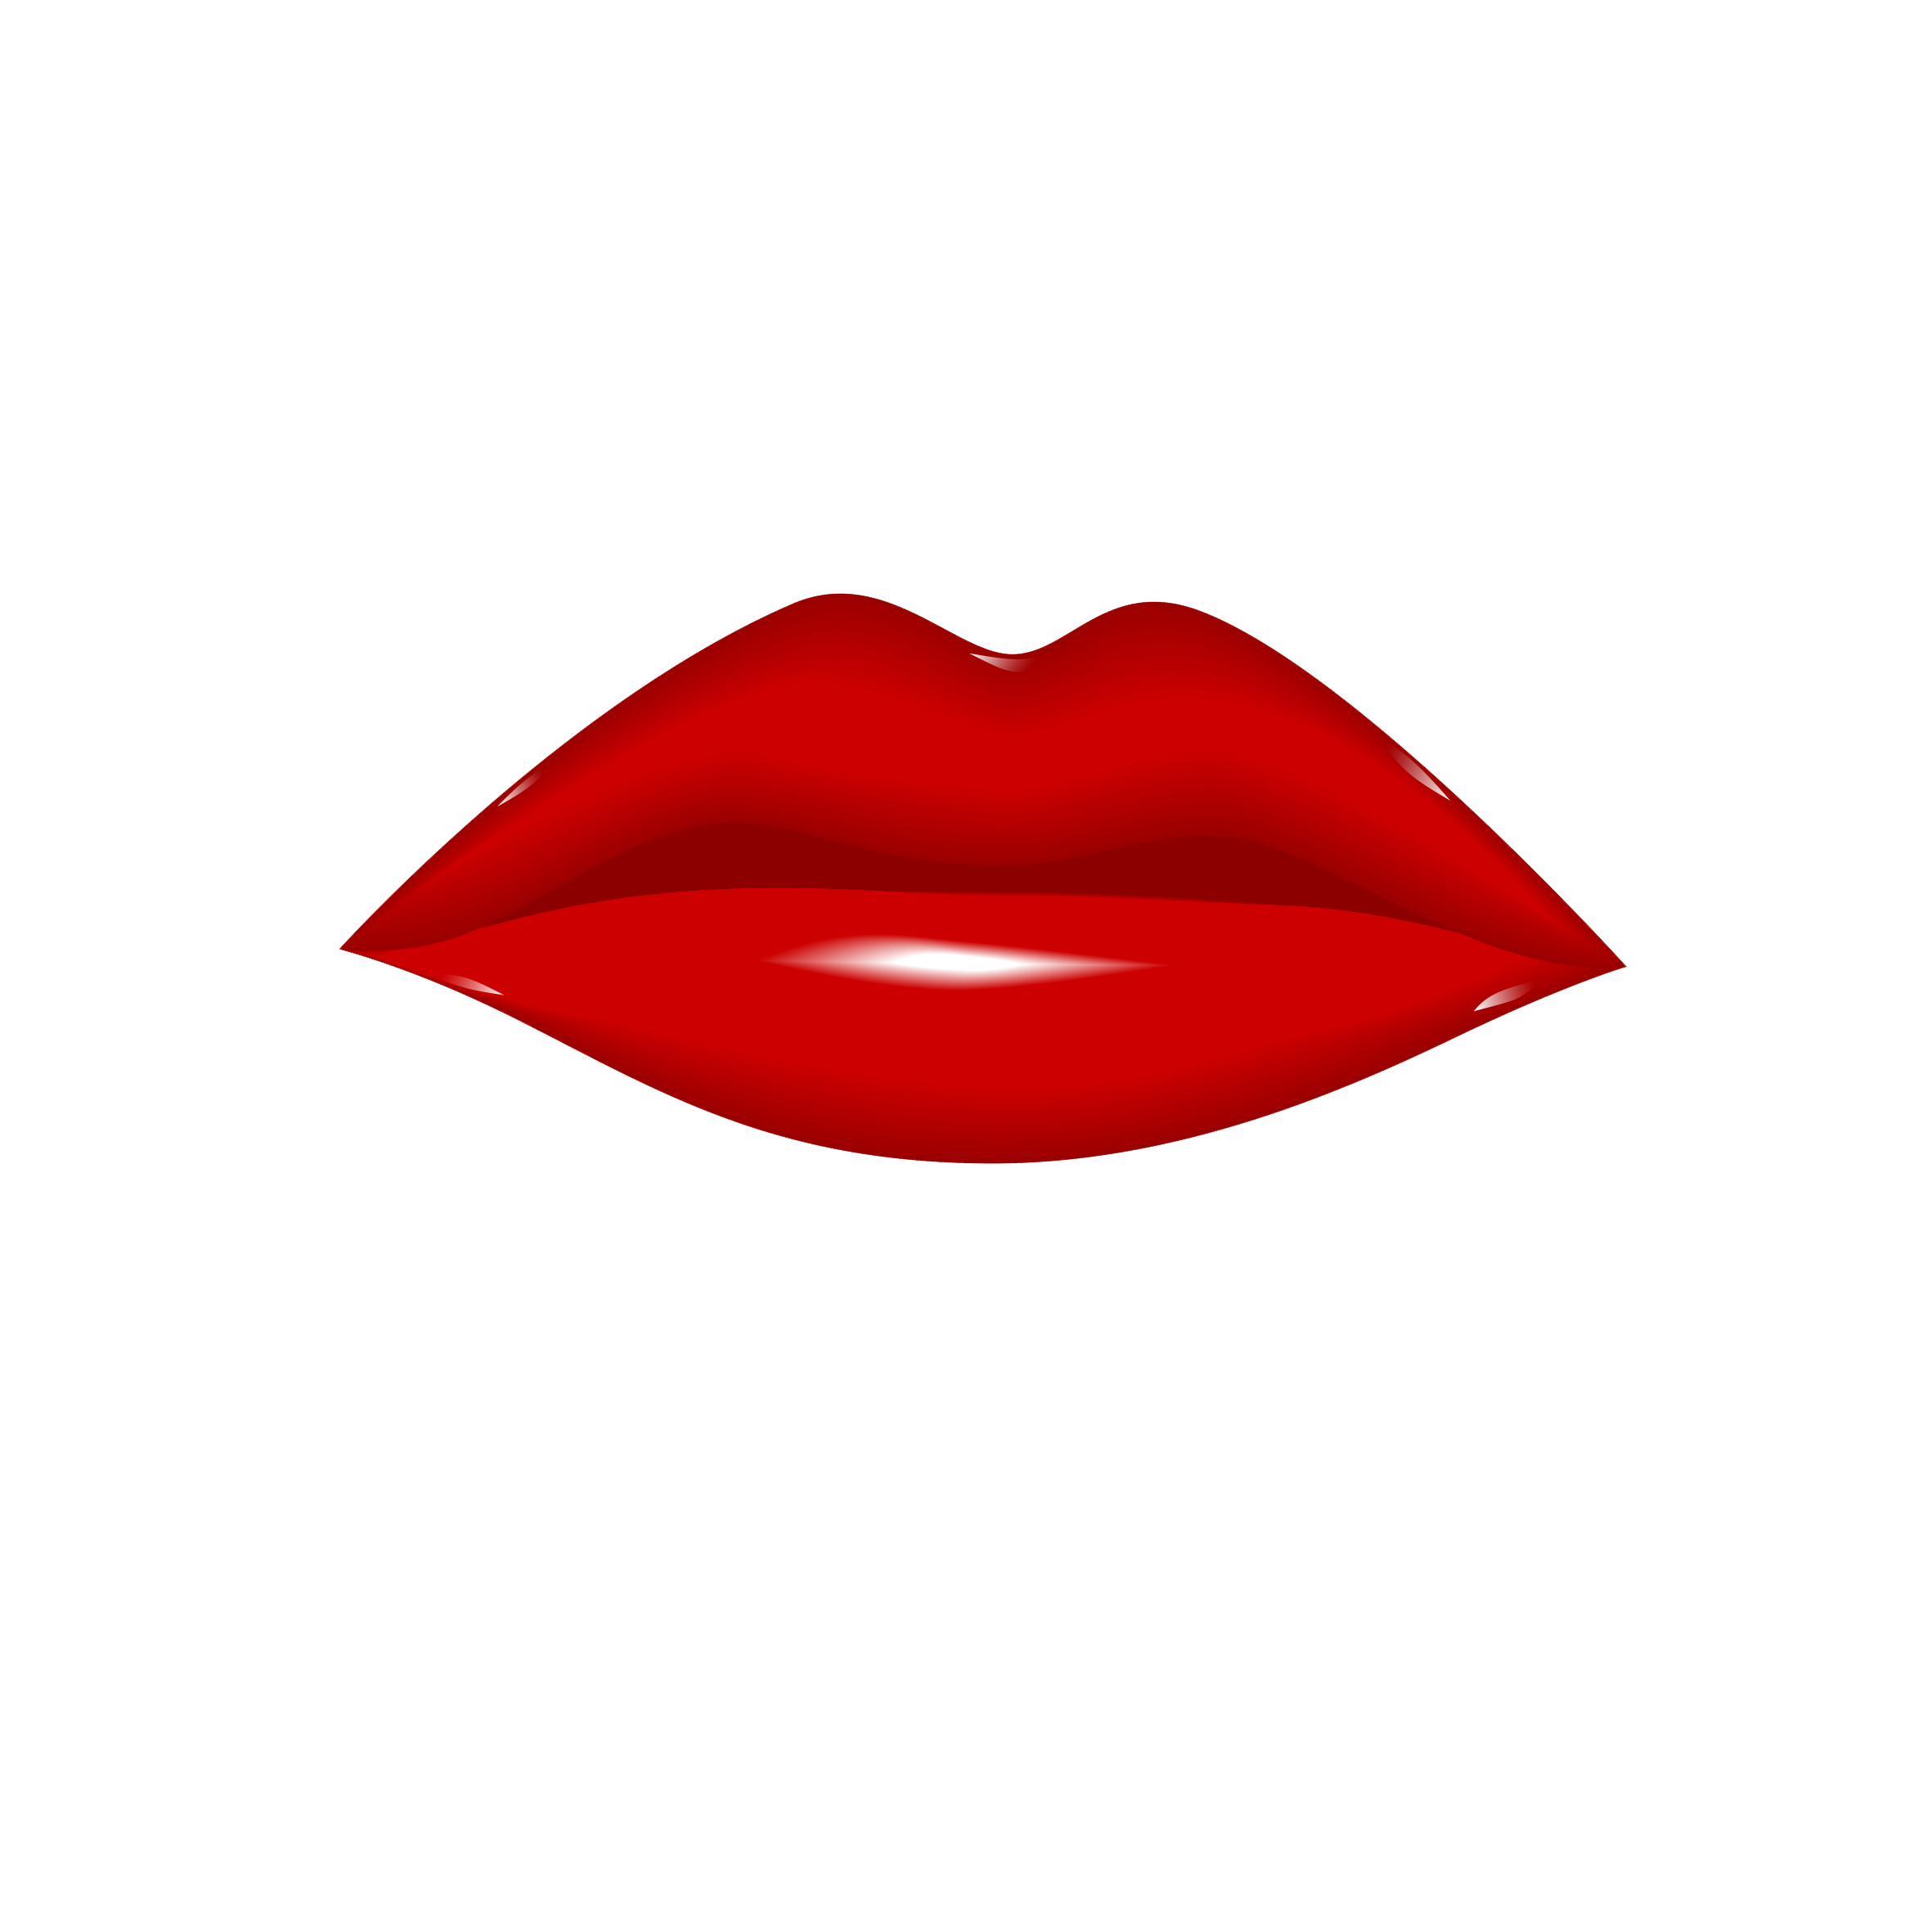 Red Lipstick - Big red lips png download - 2362*2362 - Free Transparent